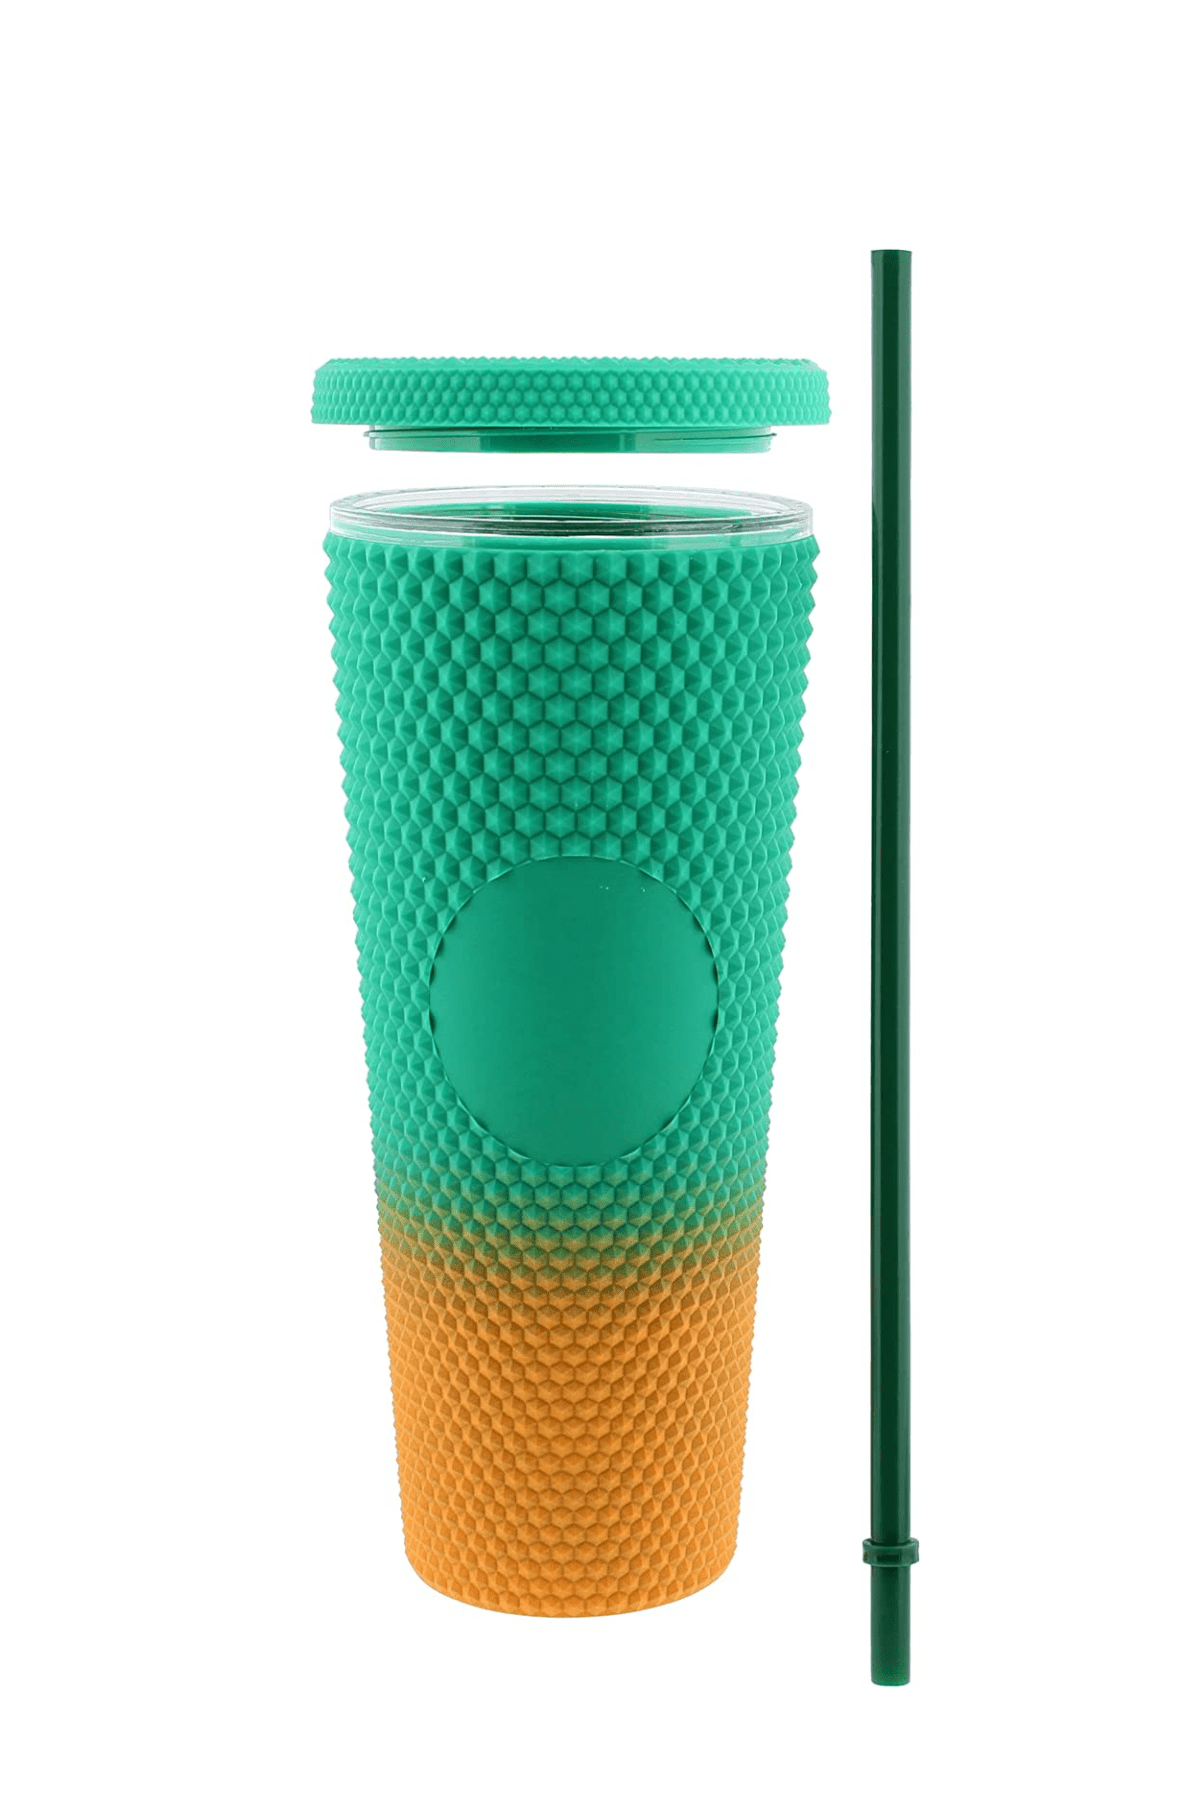 Hogg 24oz Studded Tumbler with lid and straw, DIY, Customizable with Bling  or Glitter, Reusable Text…See more Hogg 24oz Studded Tumbler with lid and